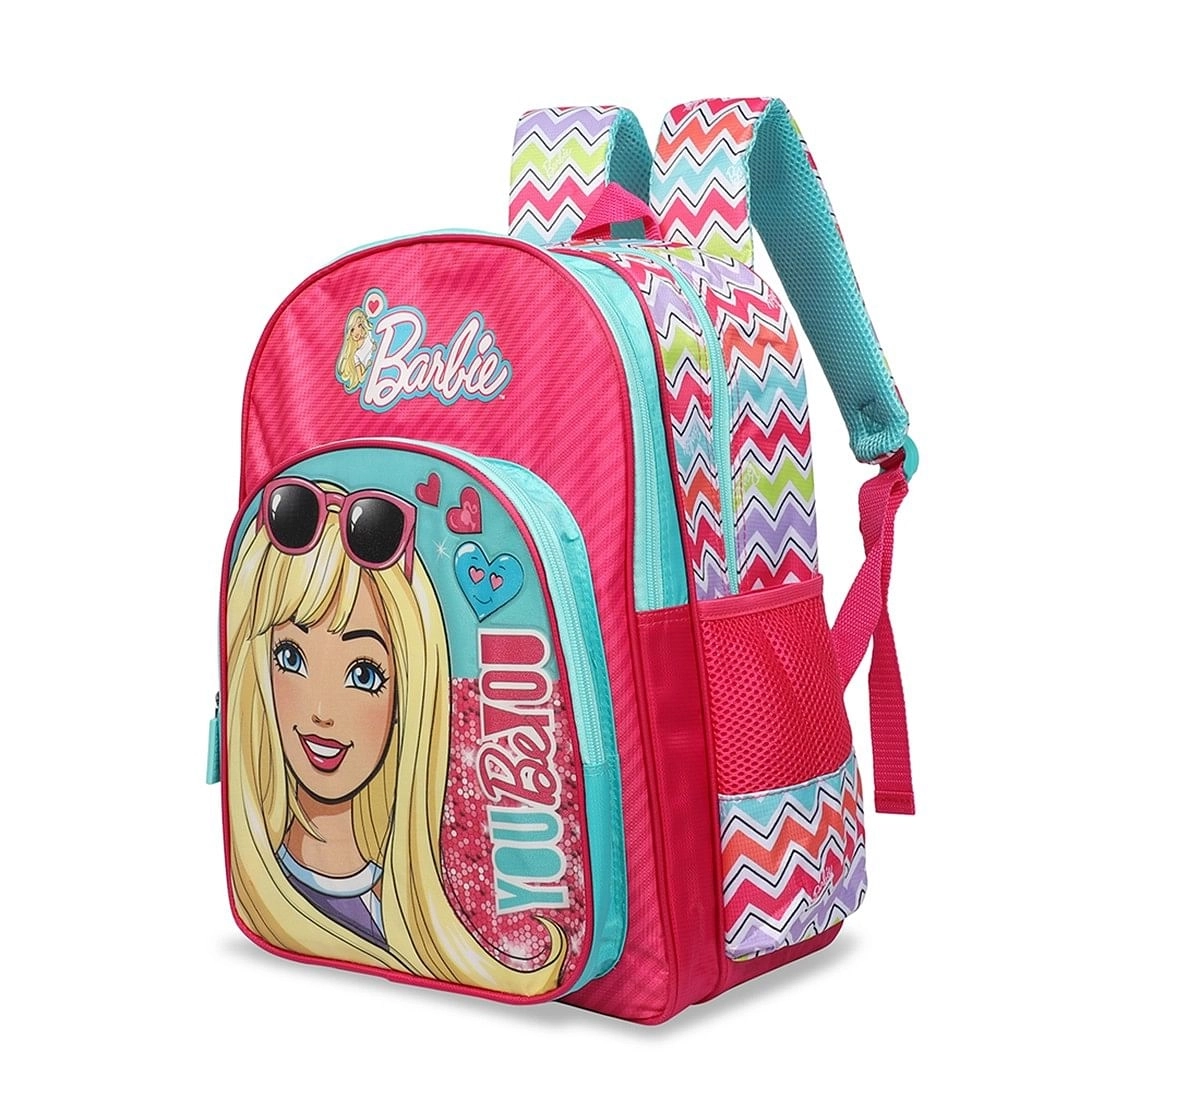 Barbie Barbie You Be You School Bag 30 Cm Bags for age 3Y+ (Pink)